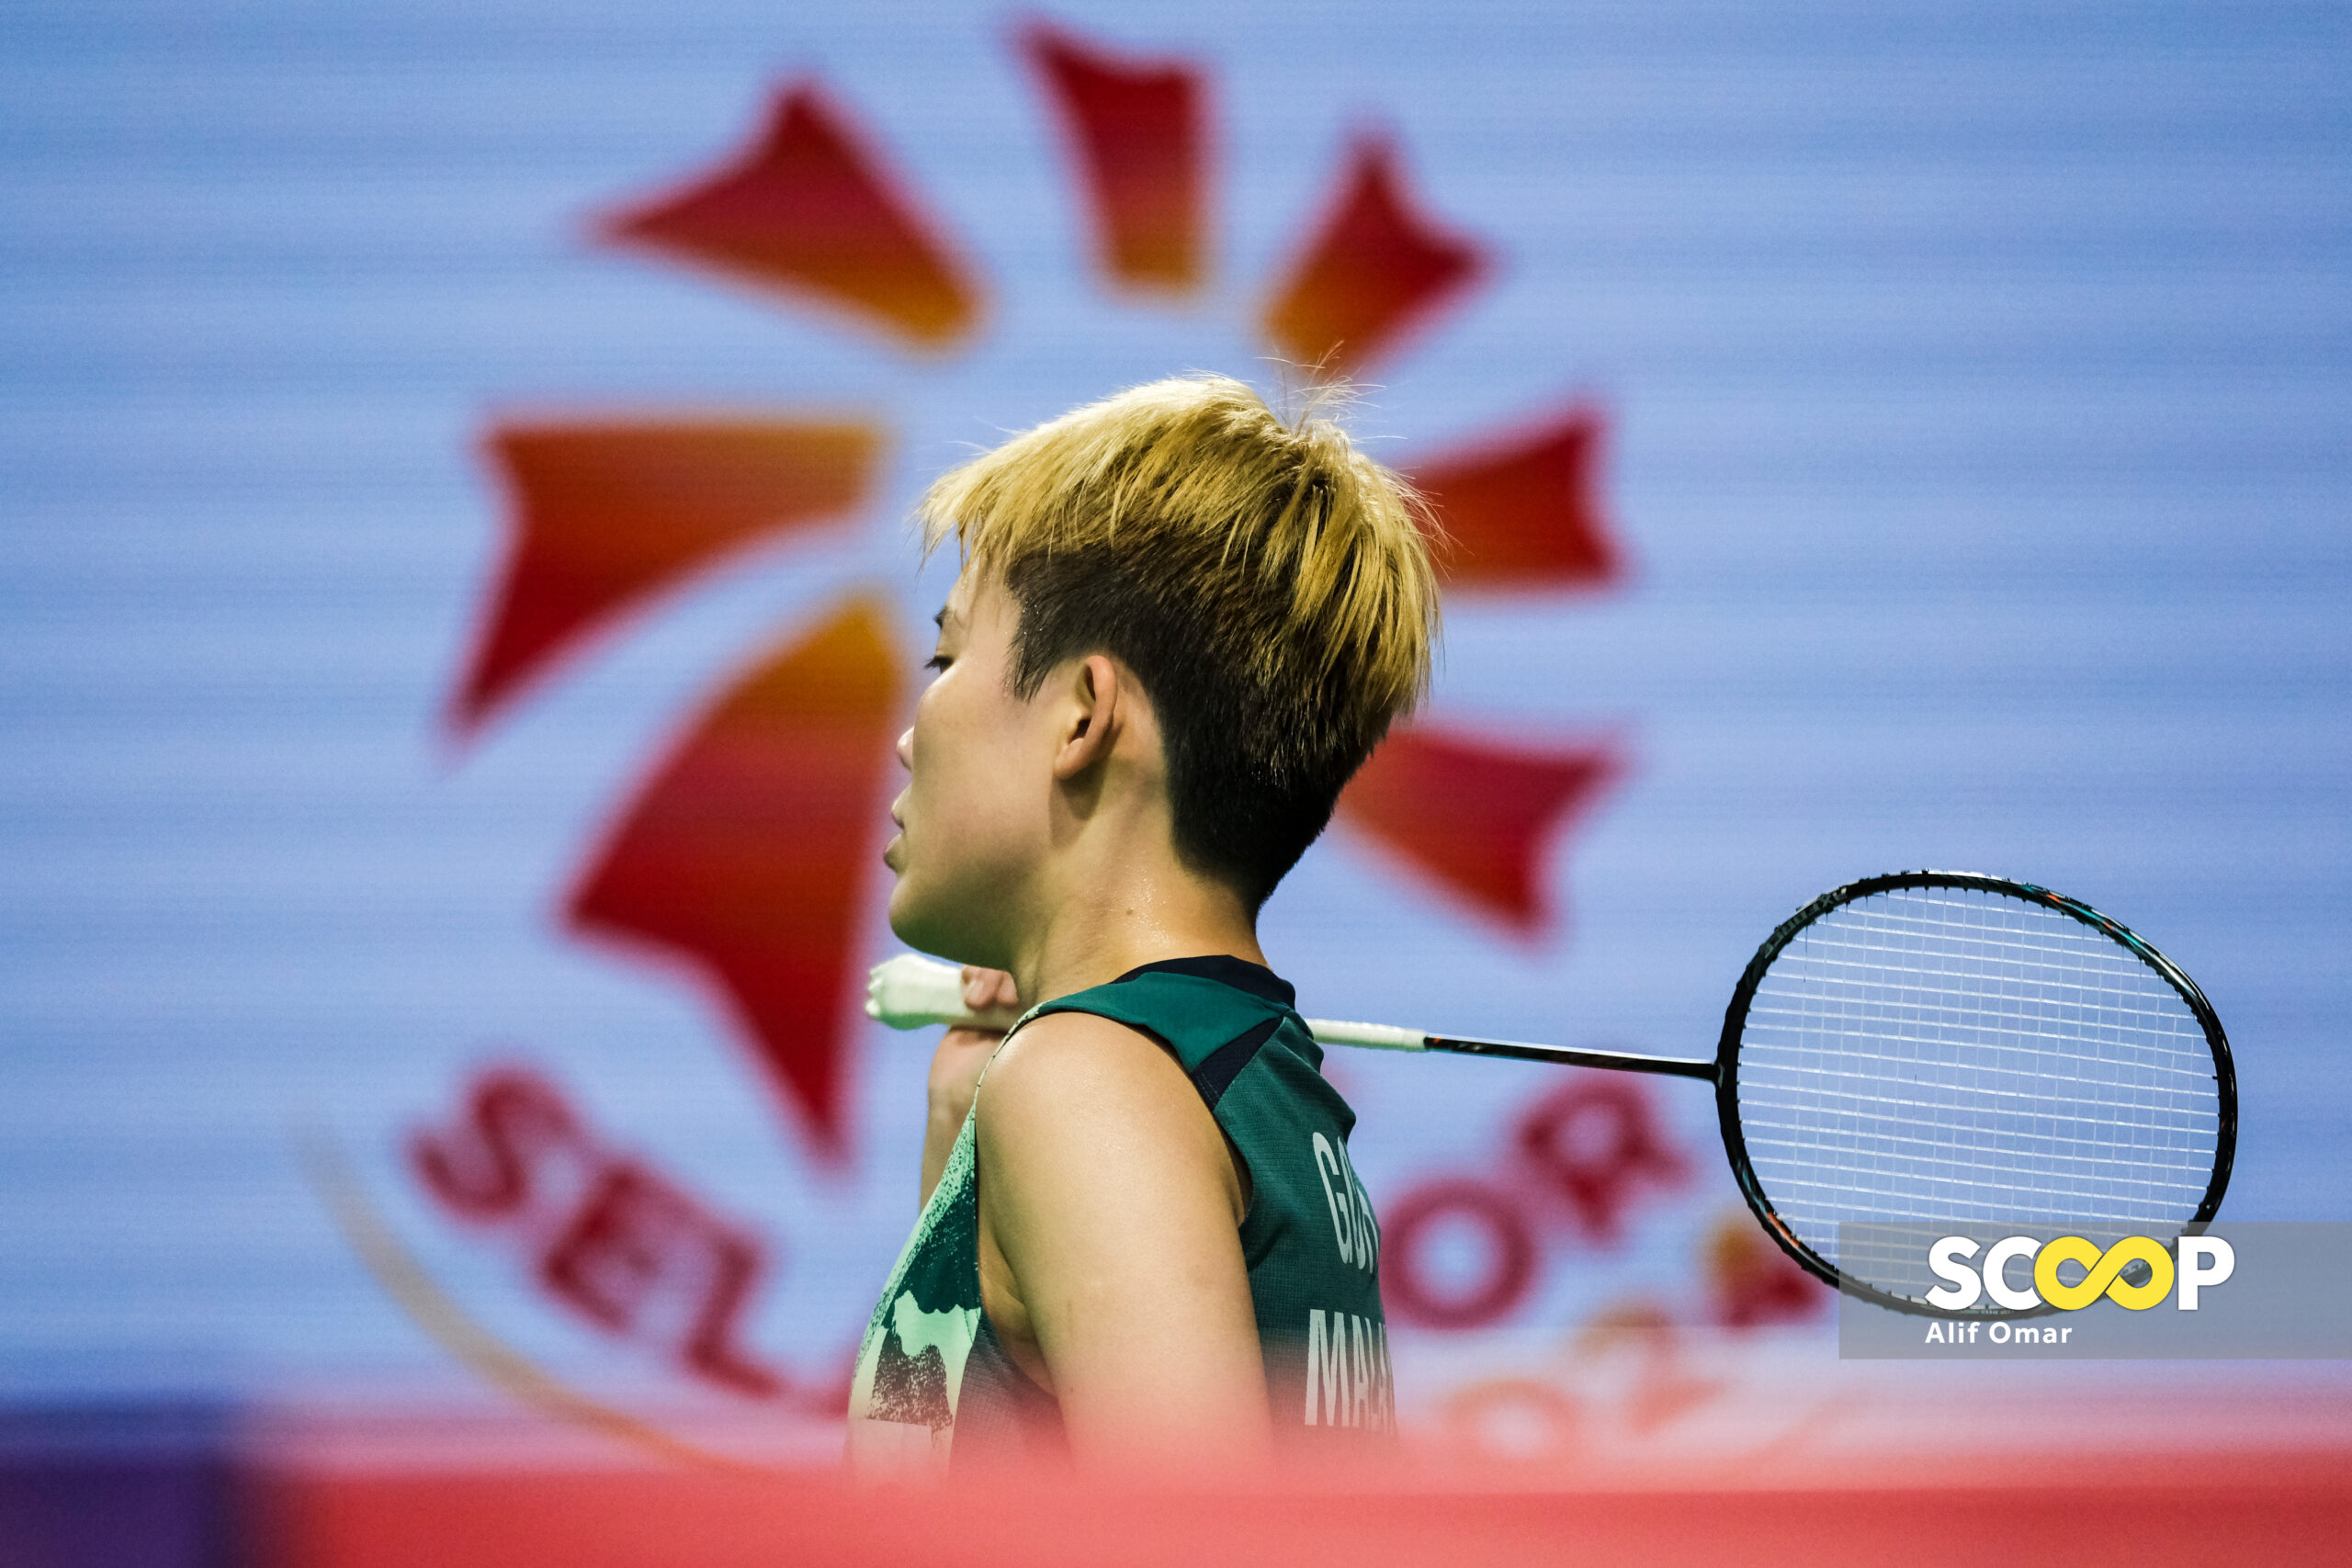 BATC: Jin Wei leads charge with underdog mentality